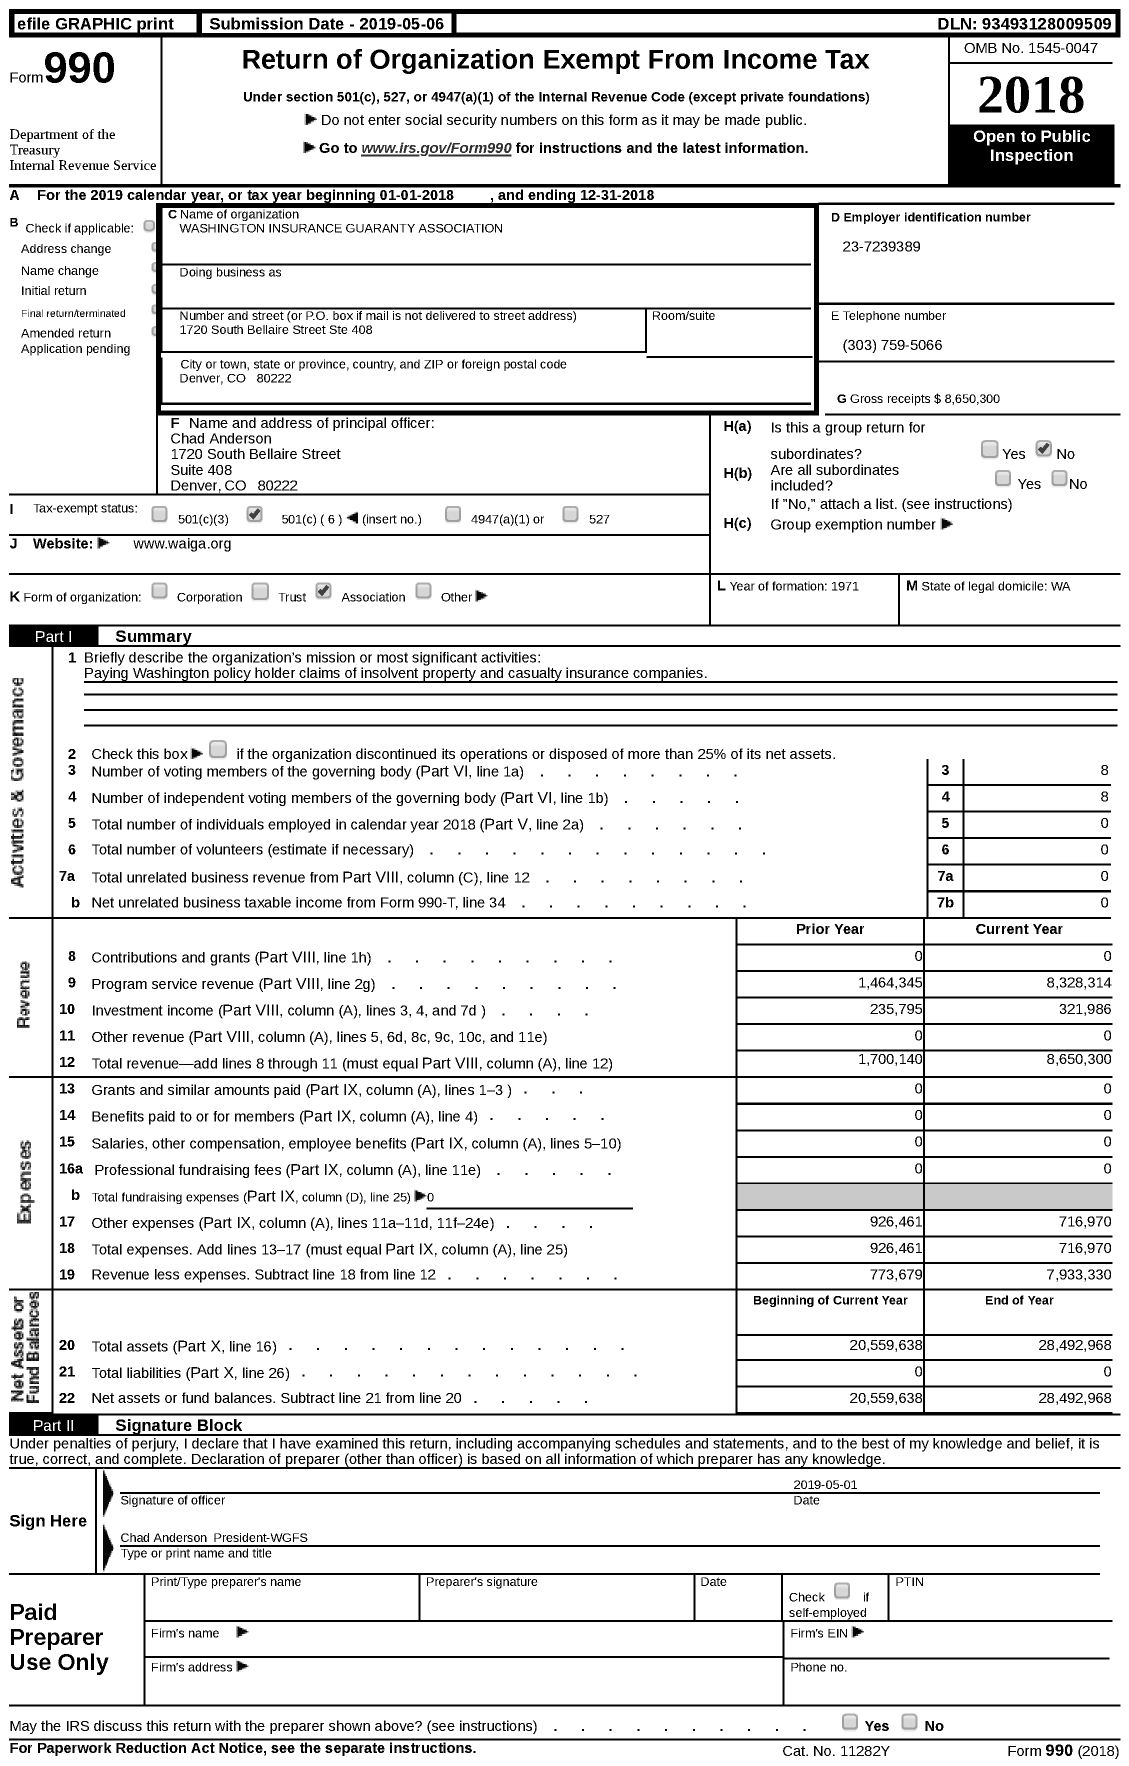 Image of first page of 2018 Form 990 for Washington Insurance Guaranty Association (WAGA)